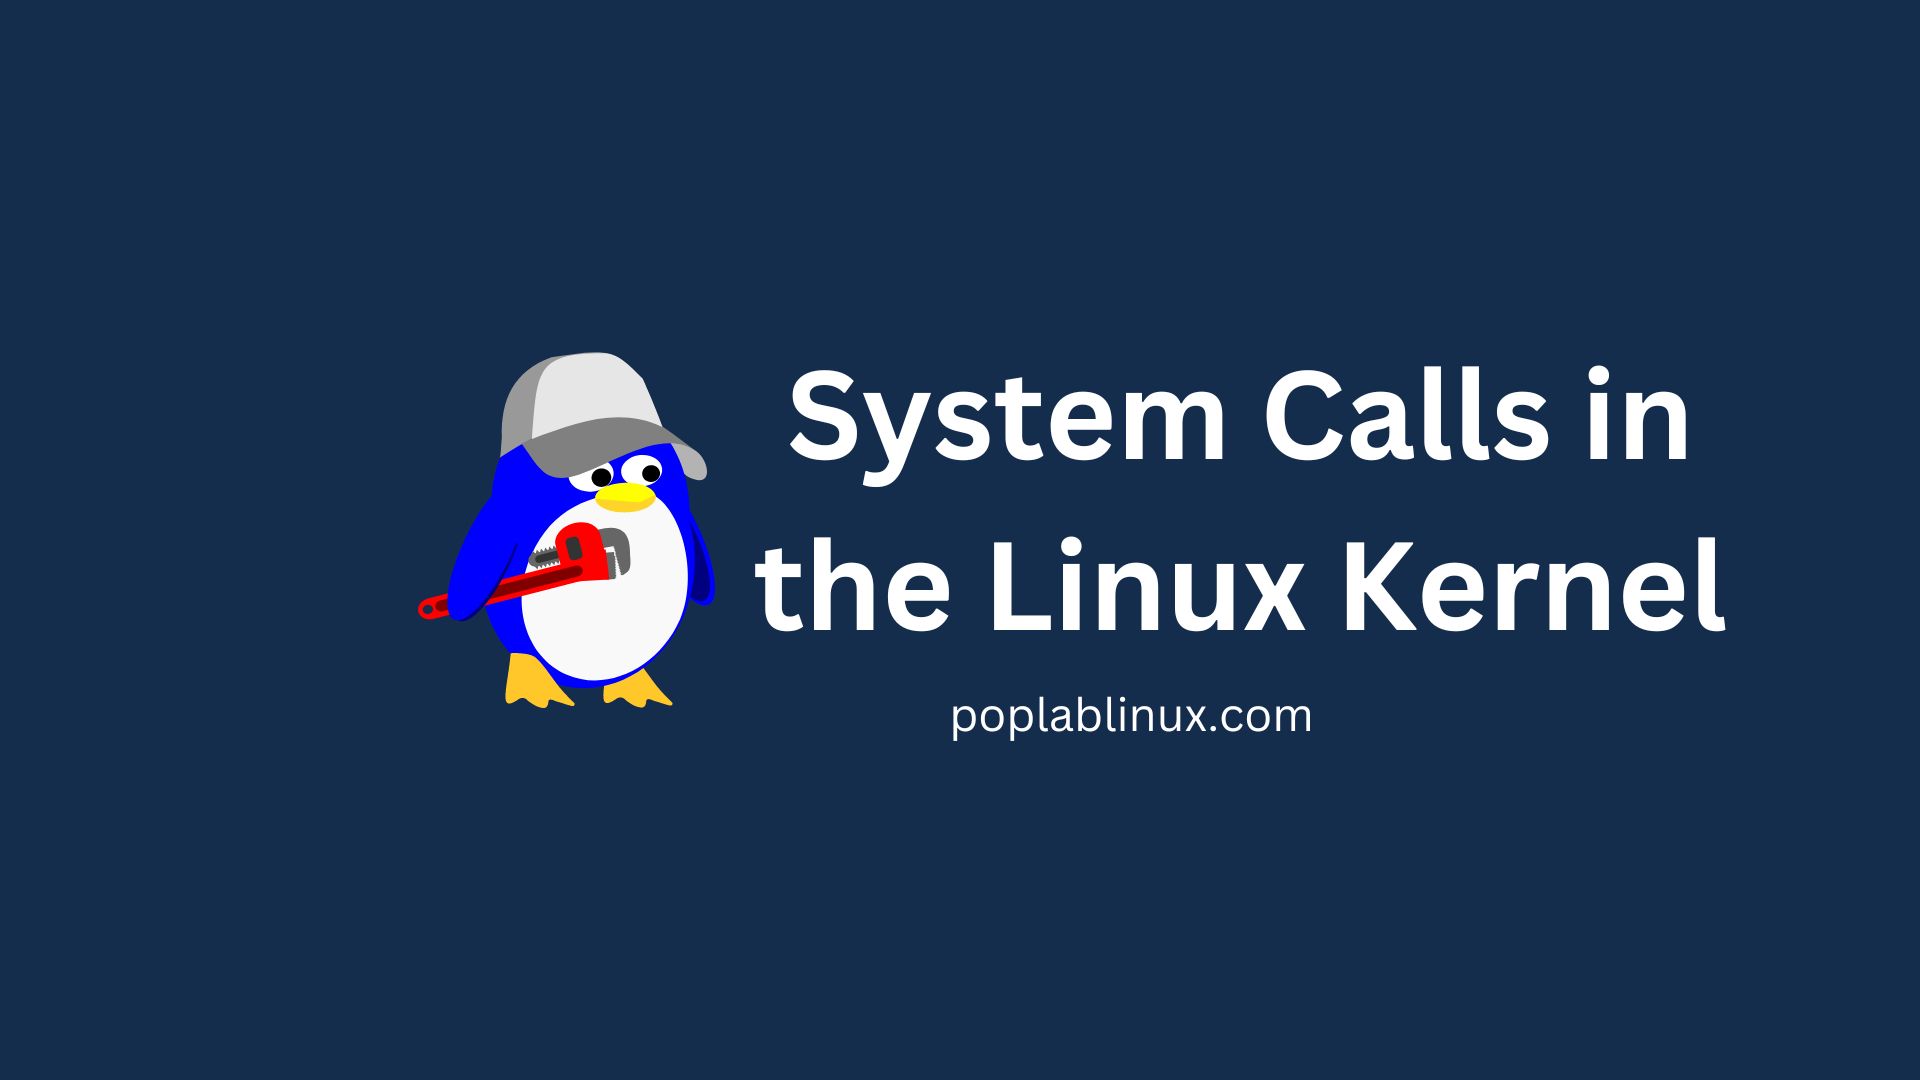 System Calls in the Linux Kernel